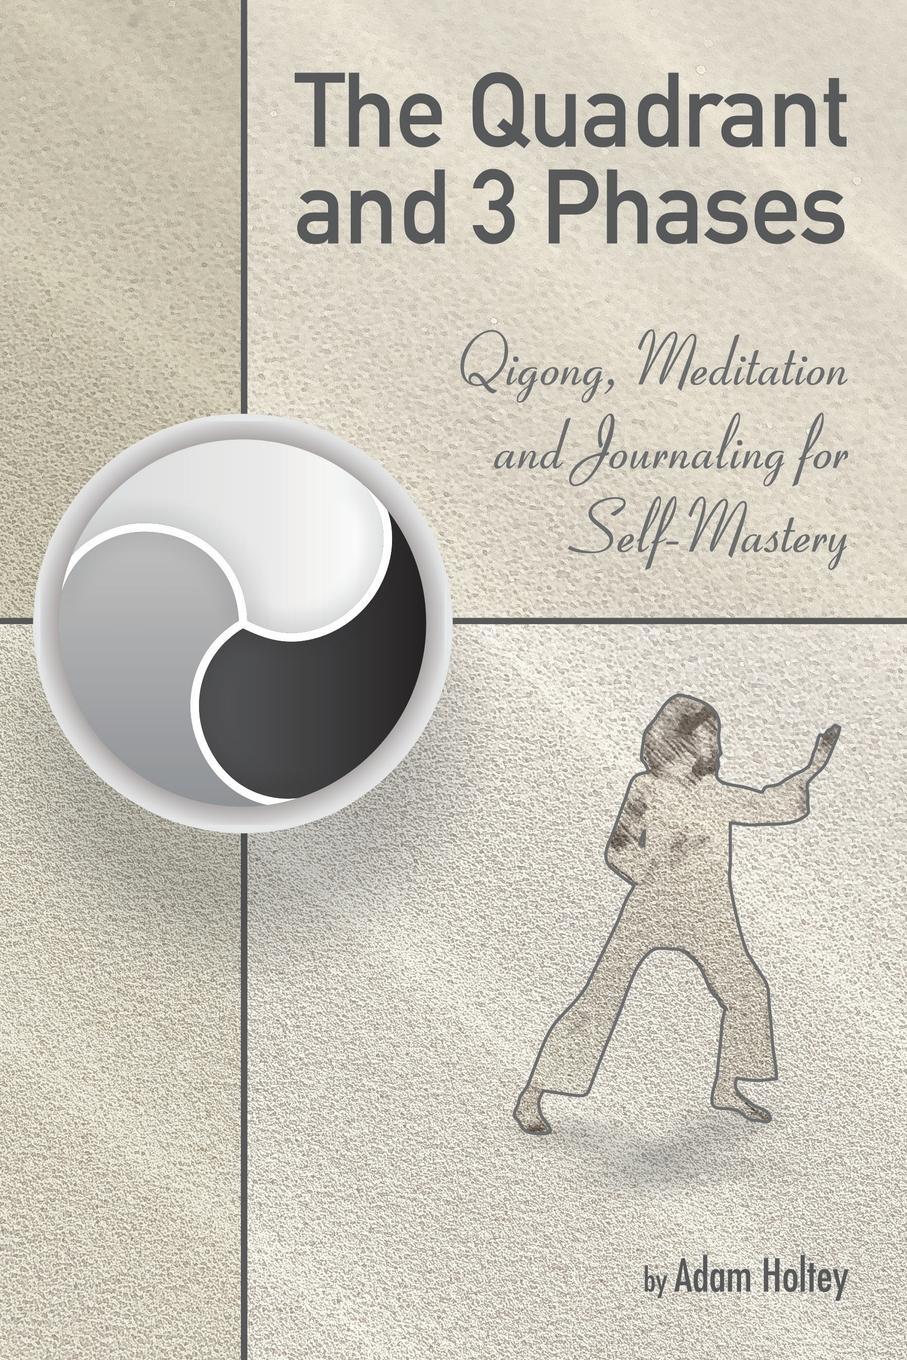 The Quadrant and 3 Phases. Qigong, Meditation and Journaling for Self-Mastery. Adam Holtey